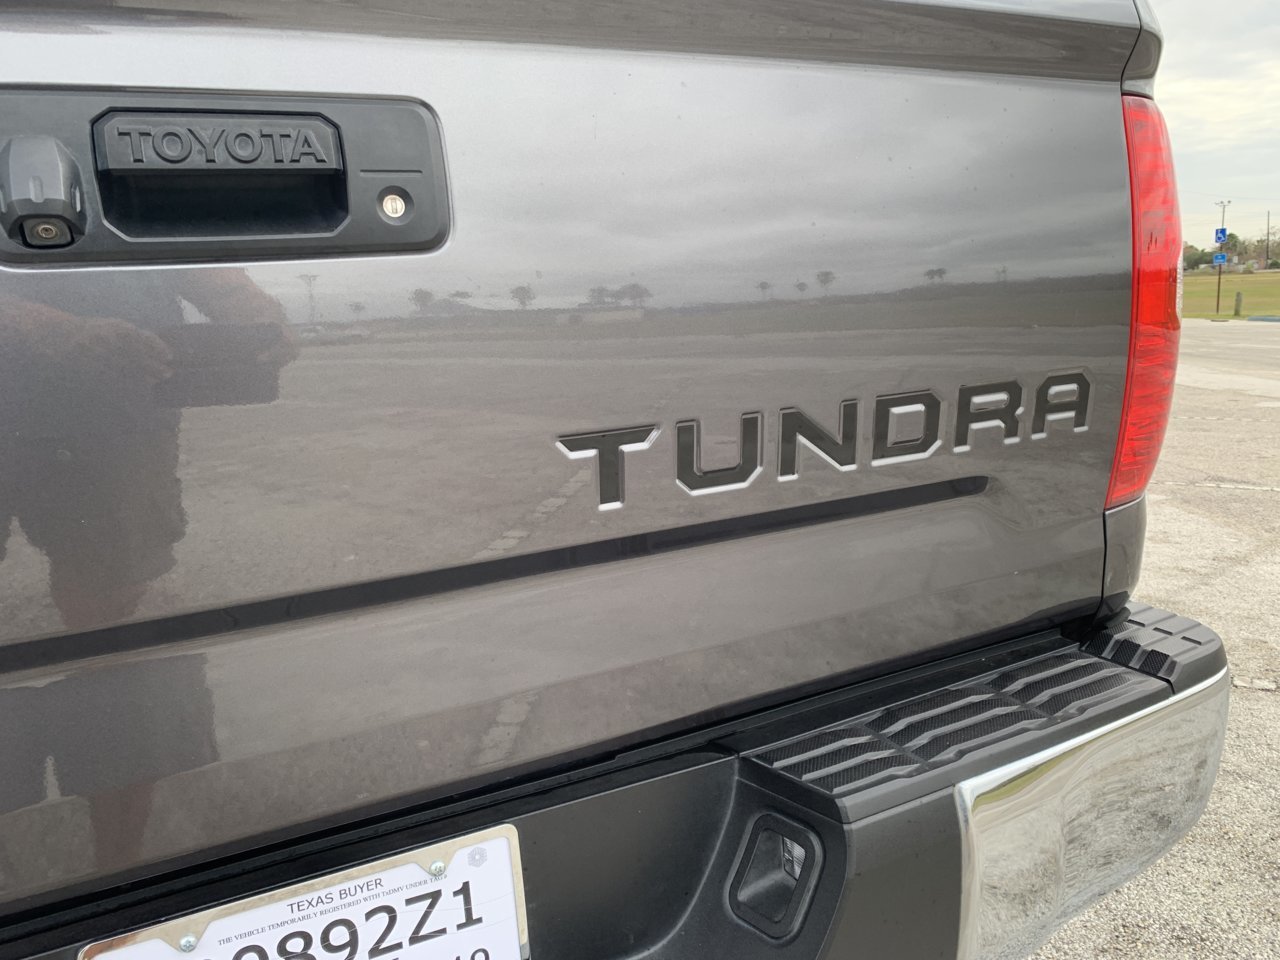 Silver CAR ROVER For Toyota Tundra 2014-2019 Tailgate Insert Letters